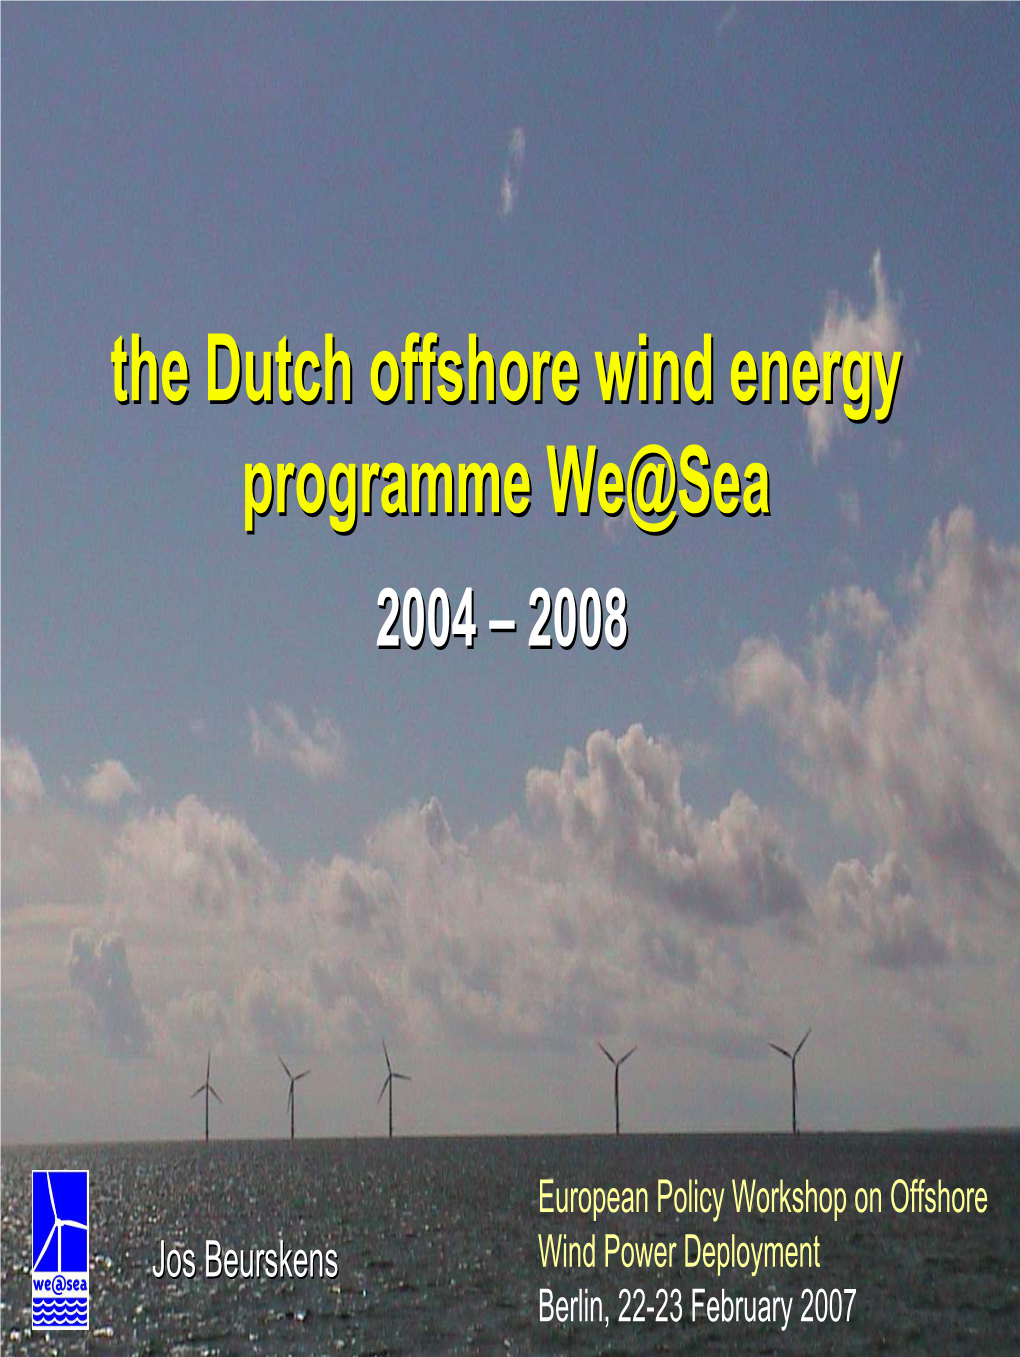 The Dutch Offshore Wind Energy Programme We@Sea